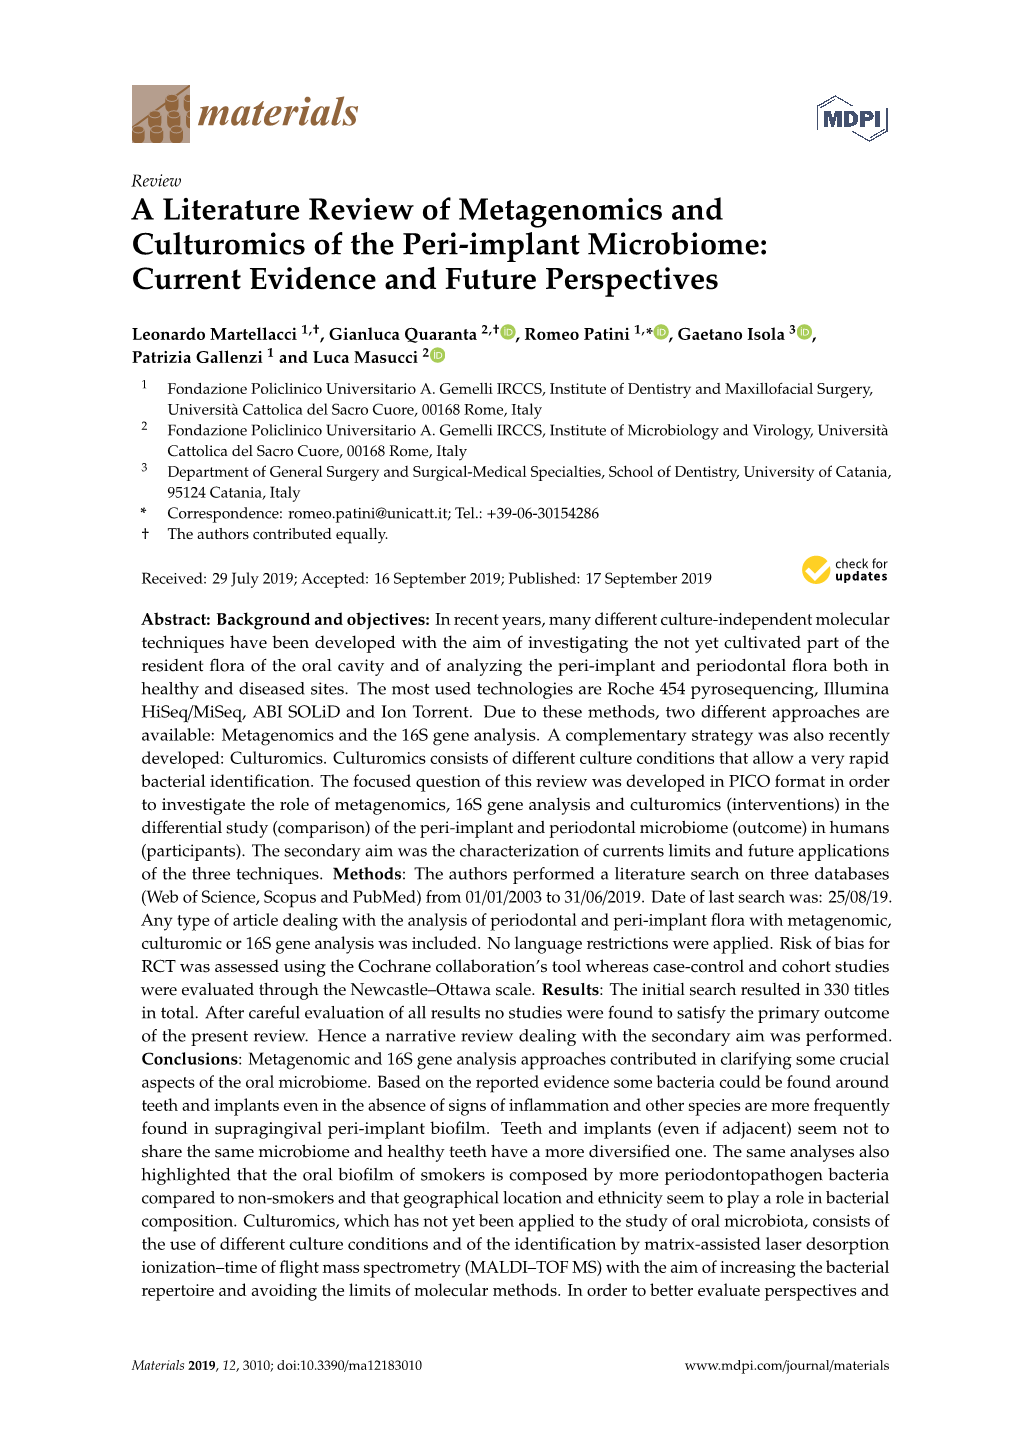 A Literature Review of Metagenomics and Culturomics of the Peri-Implant Microbiome: Current Evidence and Future Perspectives